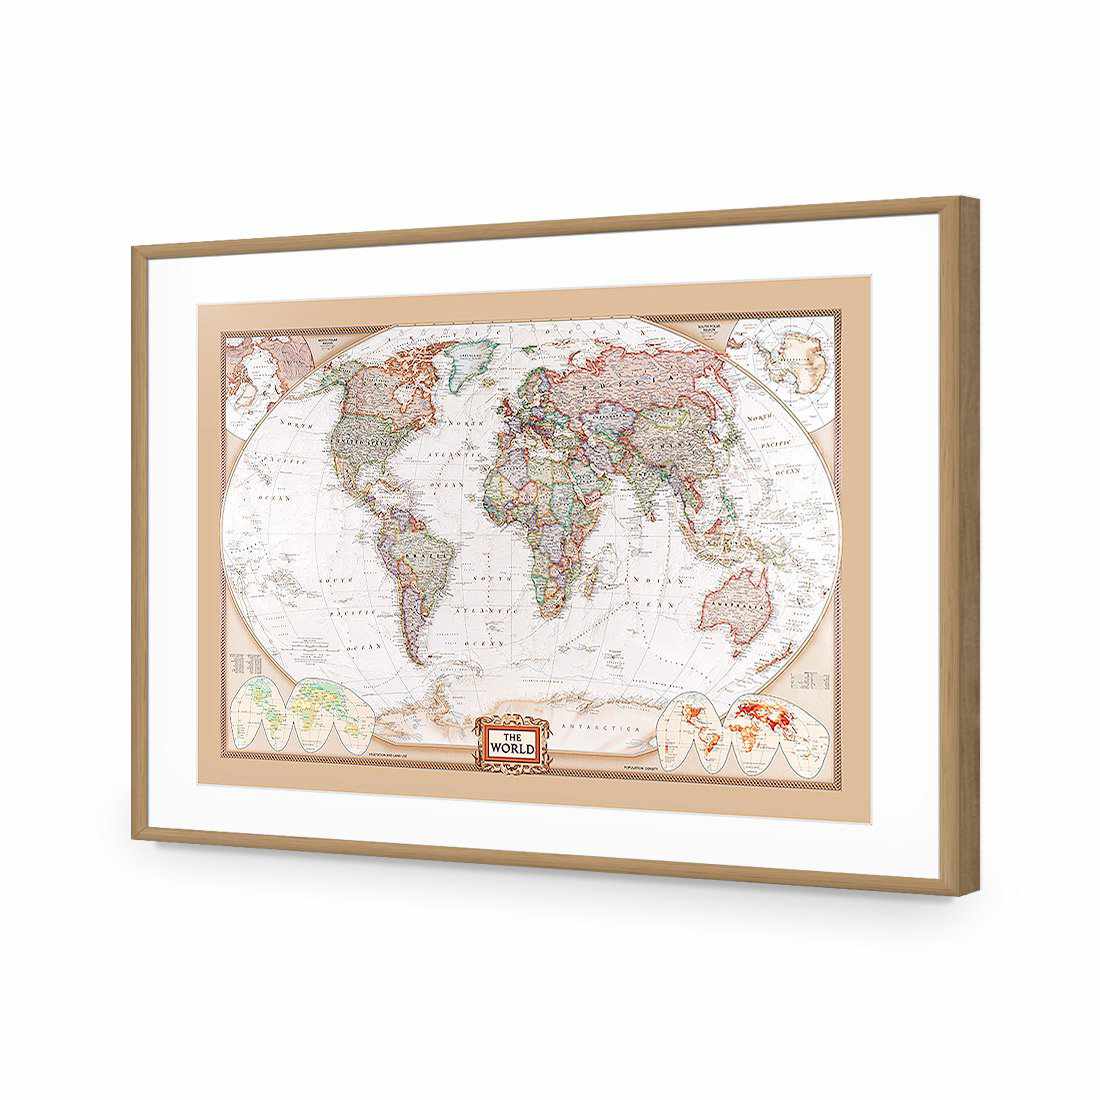 The World Map-Acrylic-Wall Art Design-With Border-Acrylic - Oak Frame-45x30cm-Wall Art Designs